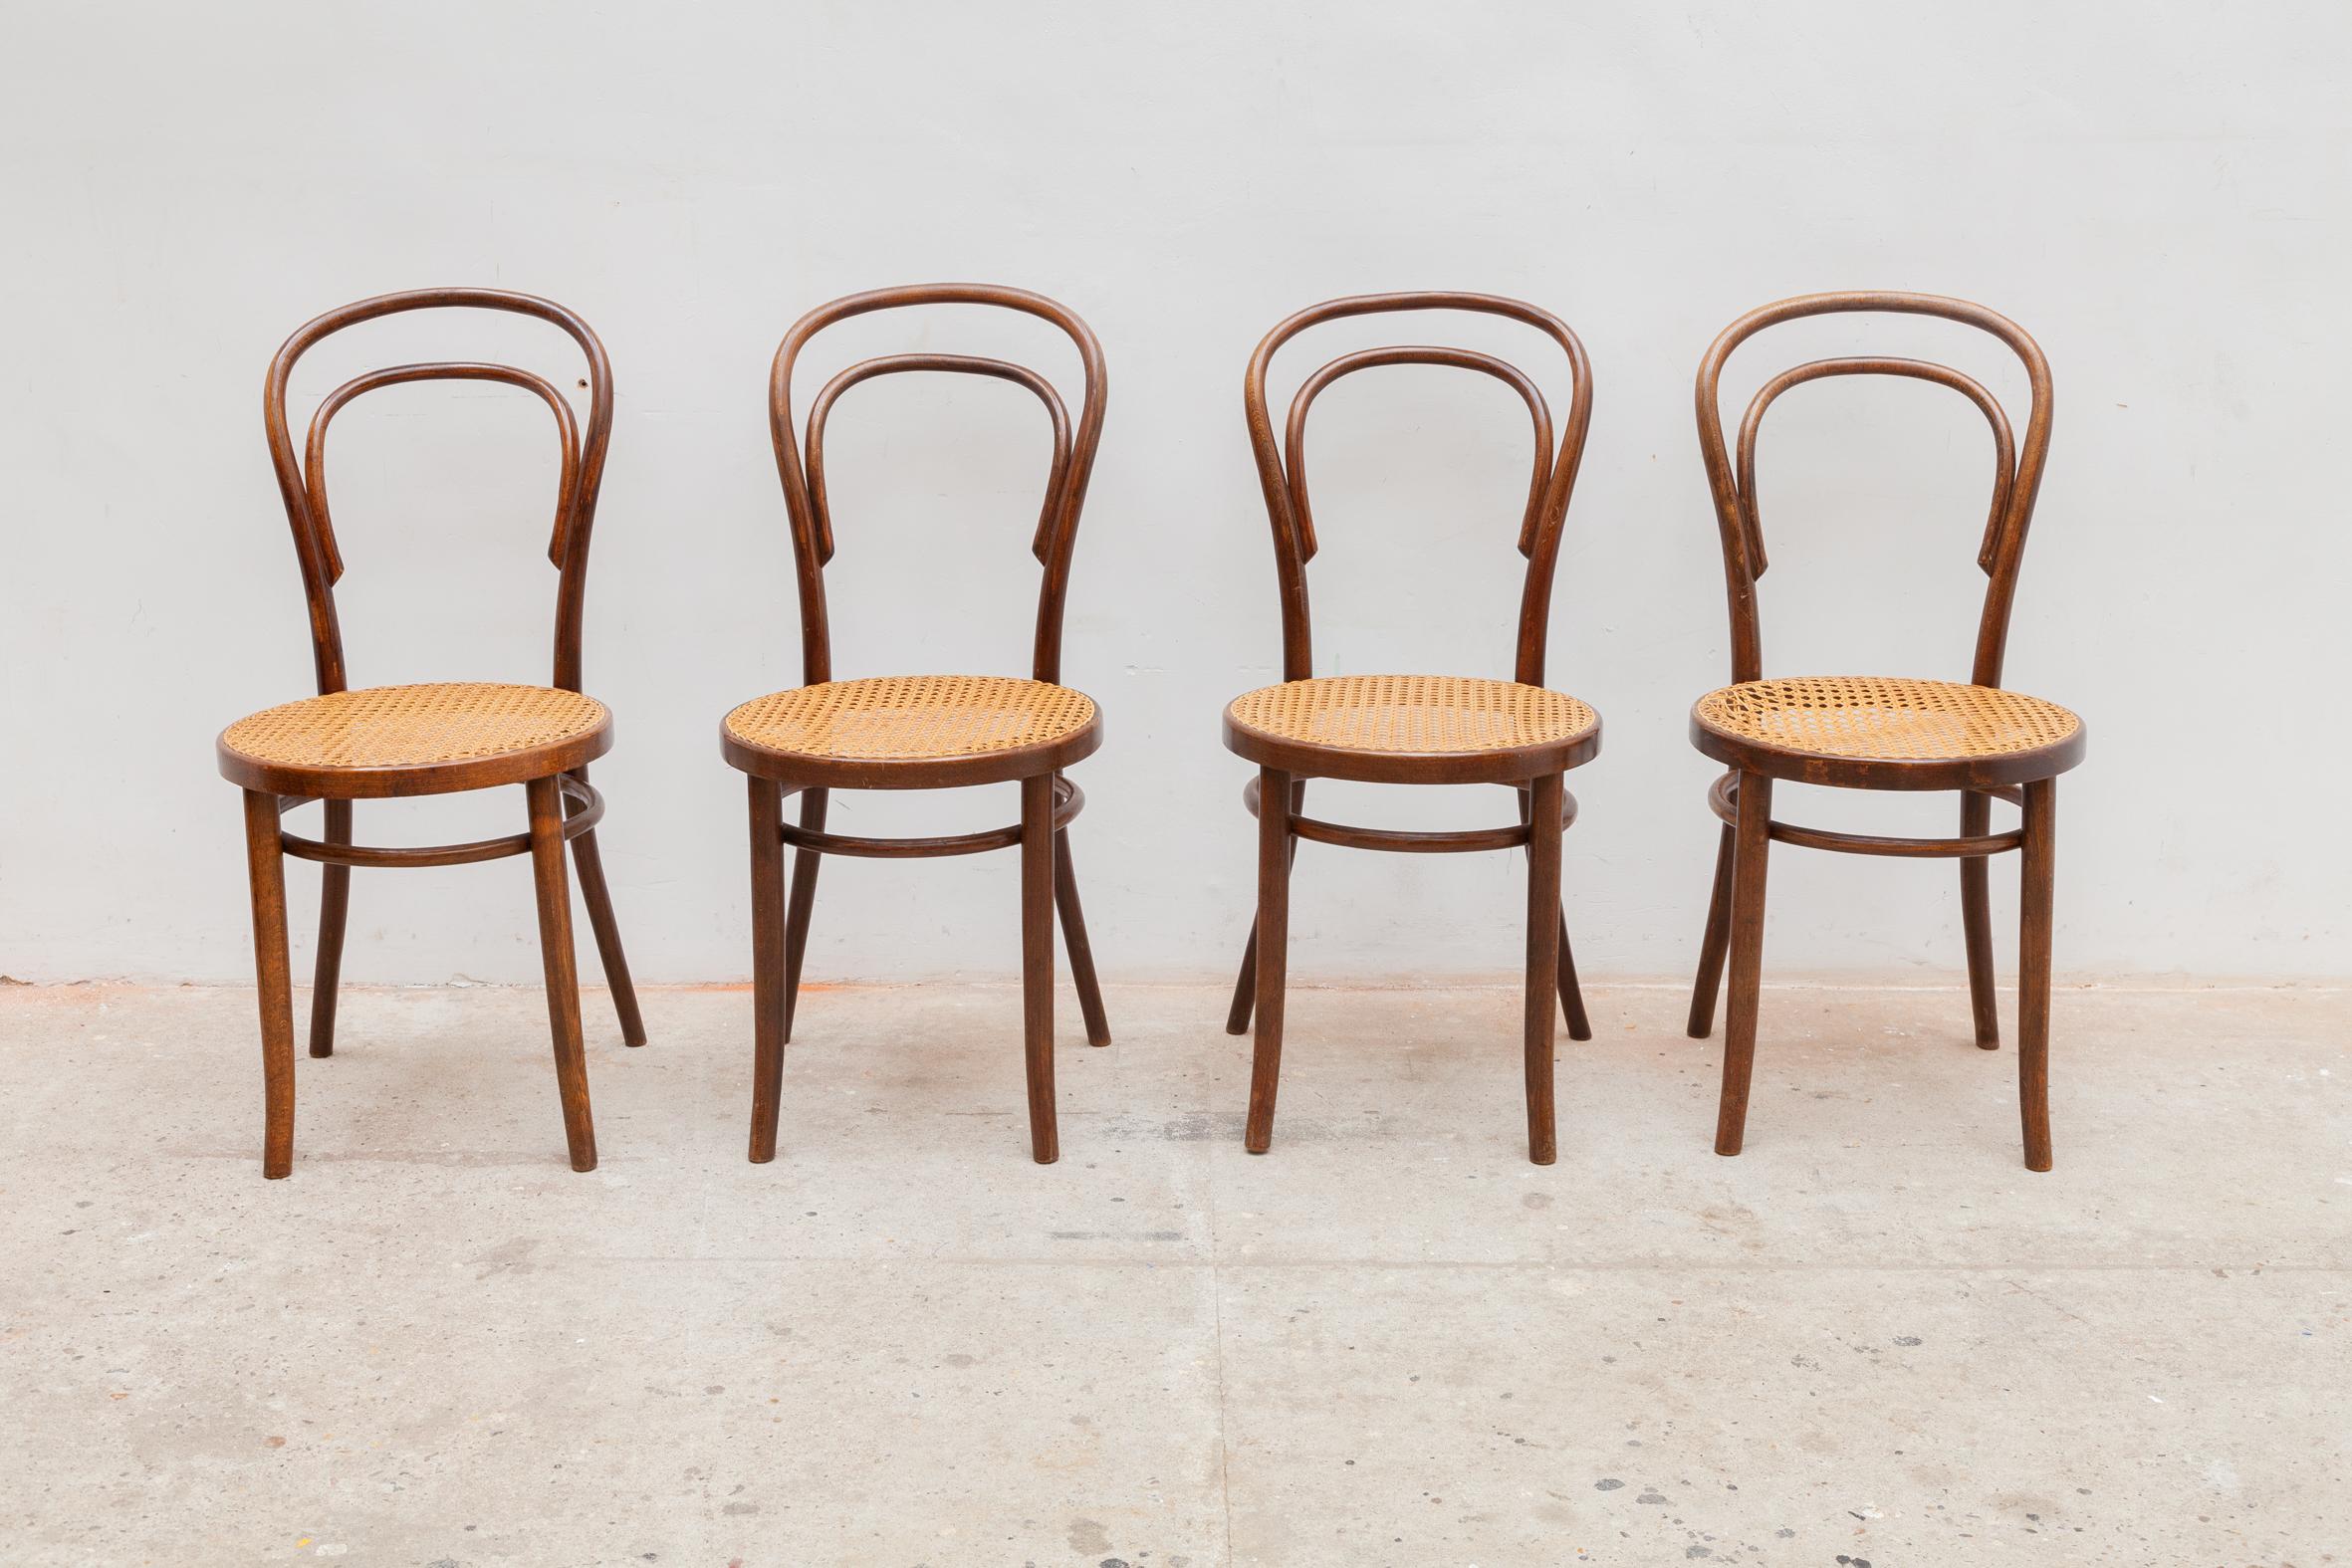 Hand-Crafted Thonet Set of Four No.14 Chairs and Two Stools, 1930s, Austria